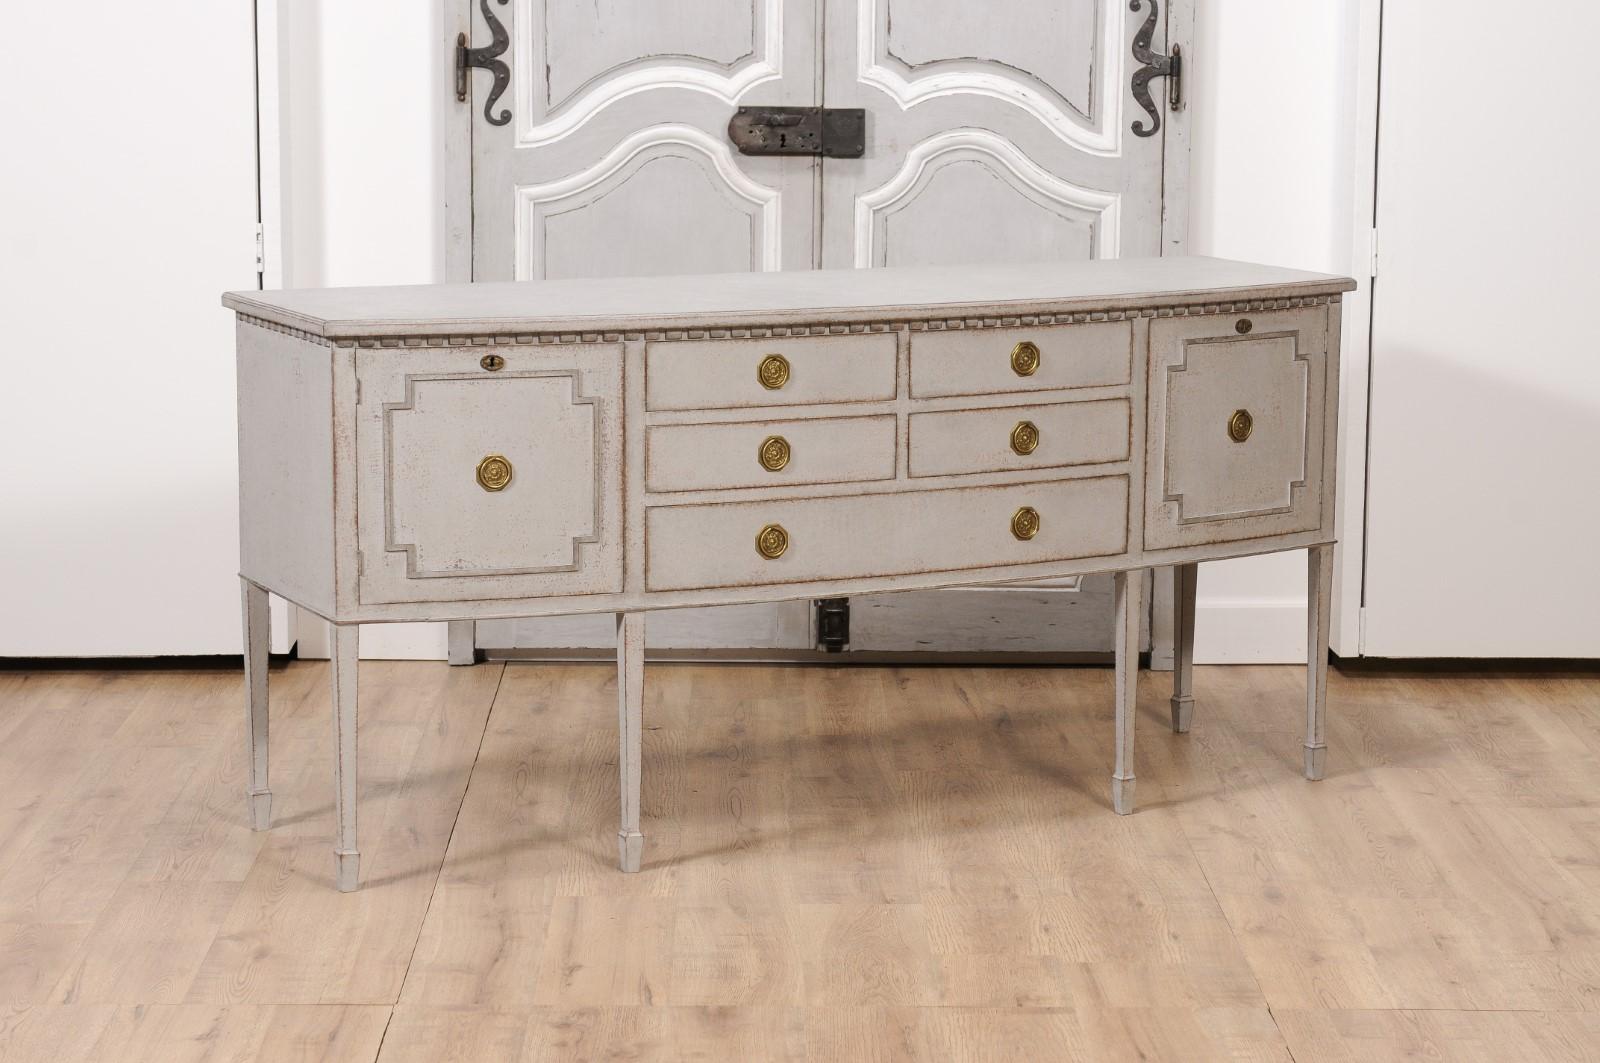 A Neoclassical style Swedish painted wood bow front sideboard from the 20th century with five drawers flanked by two doors. Immerse yourself in the elegance of the past with this Neoclassical style Swedish painted wood bow-front sideboard, dating